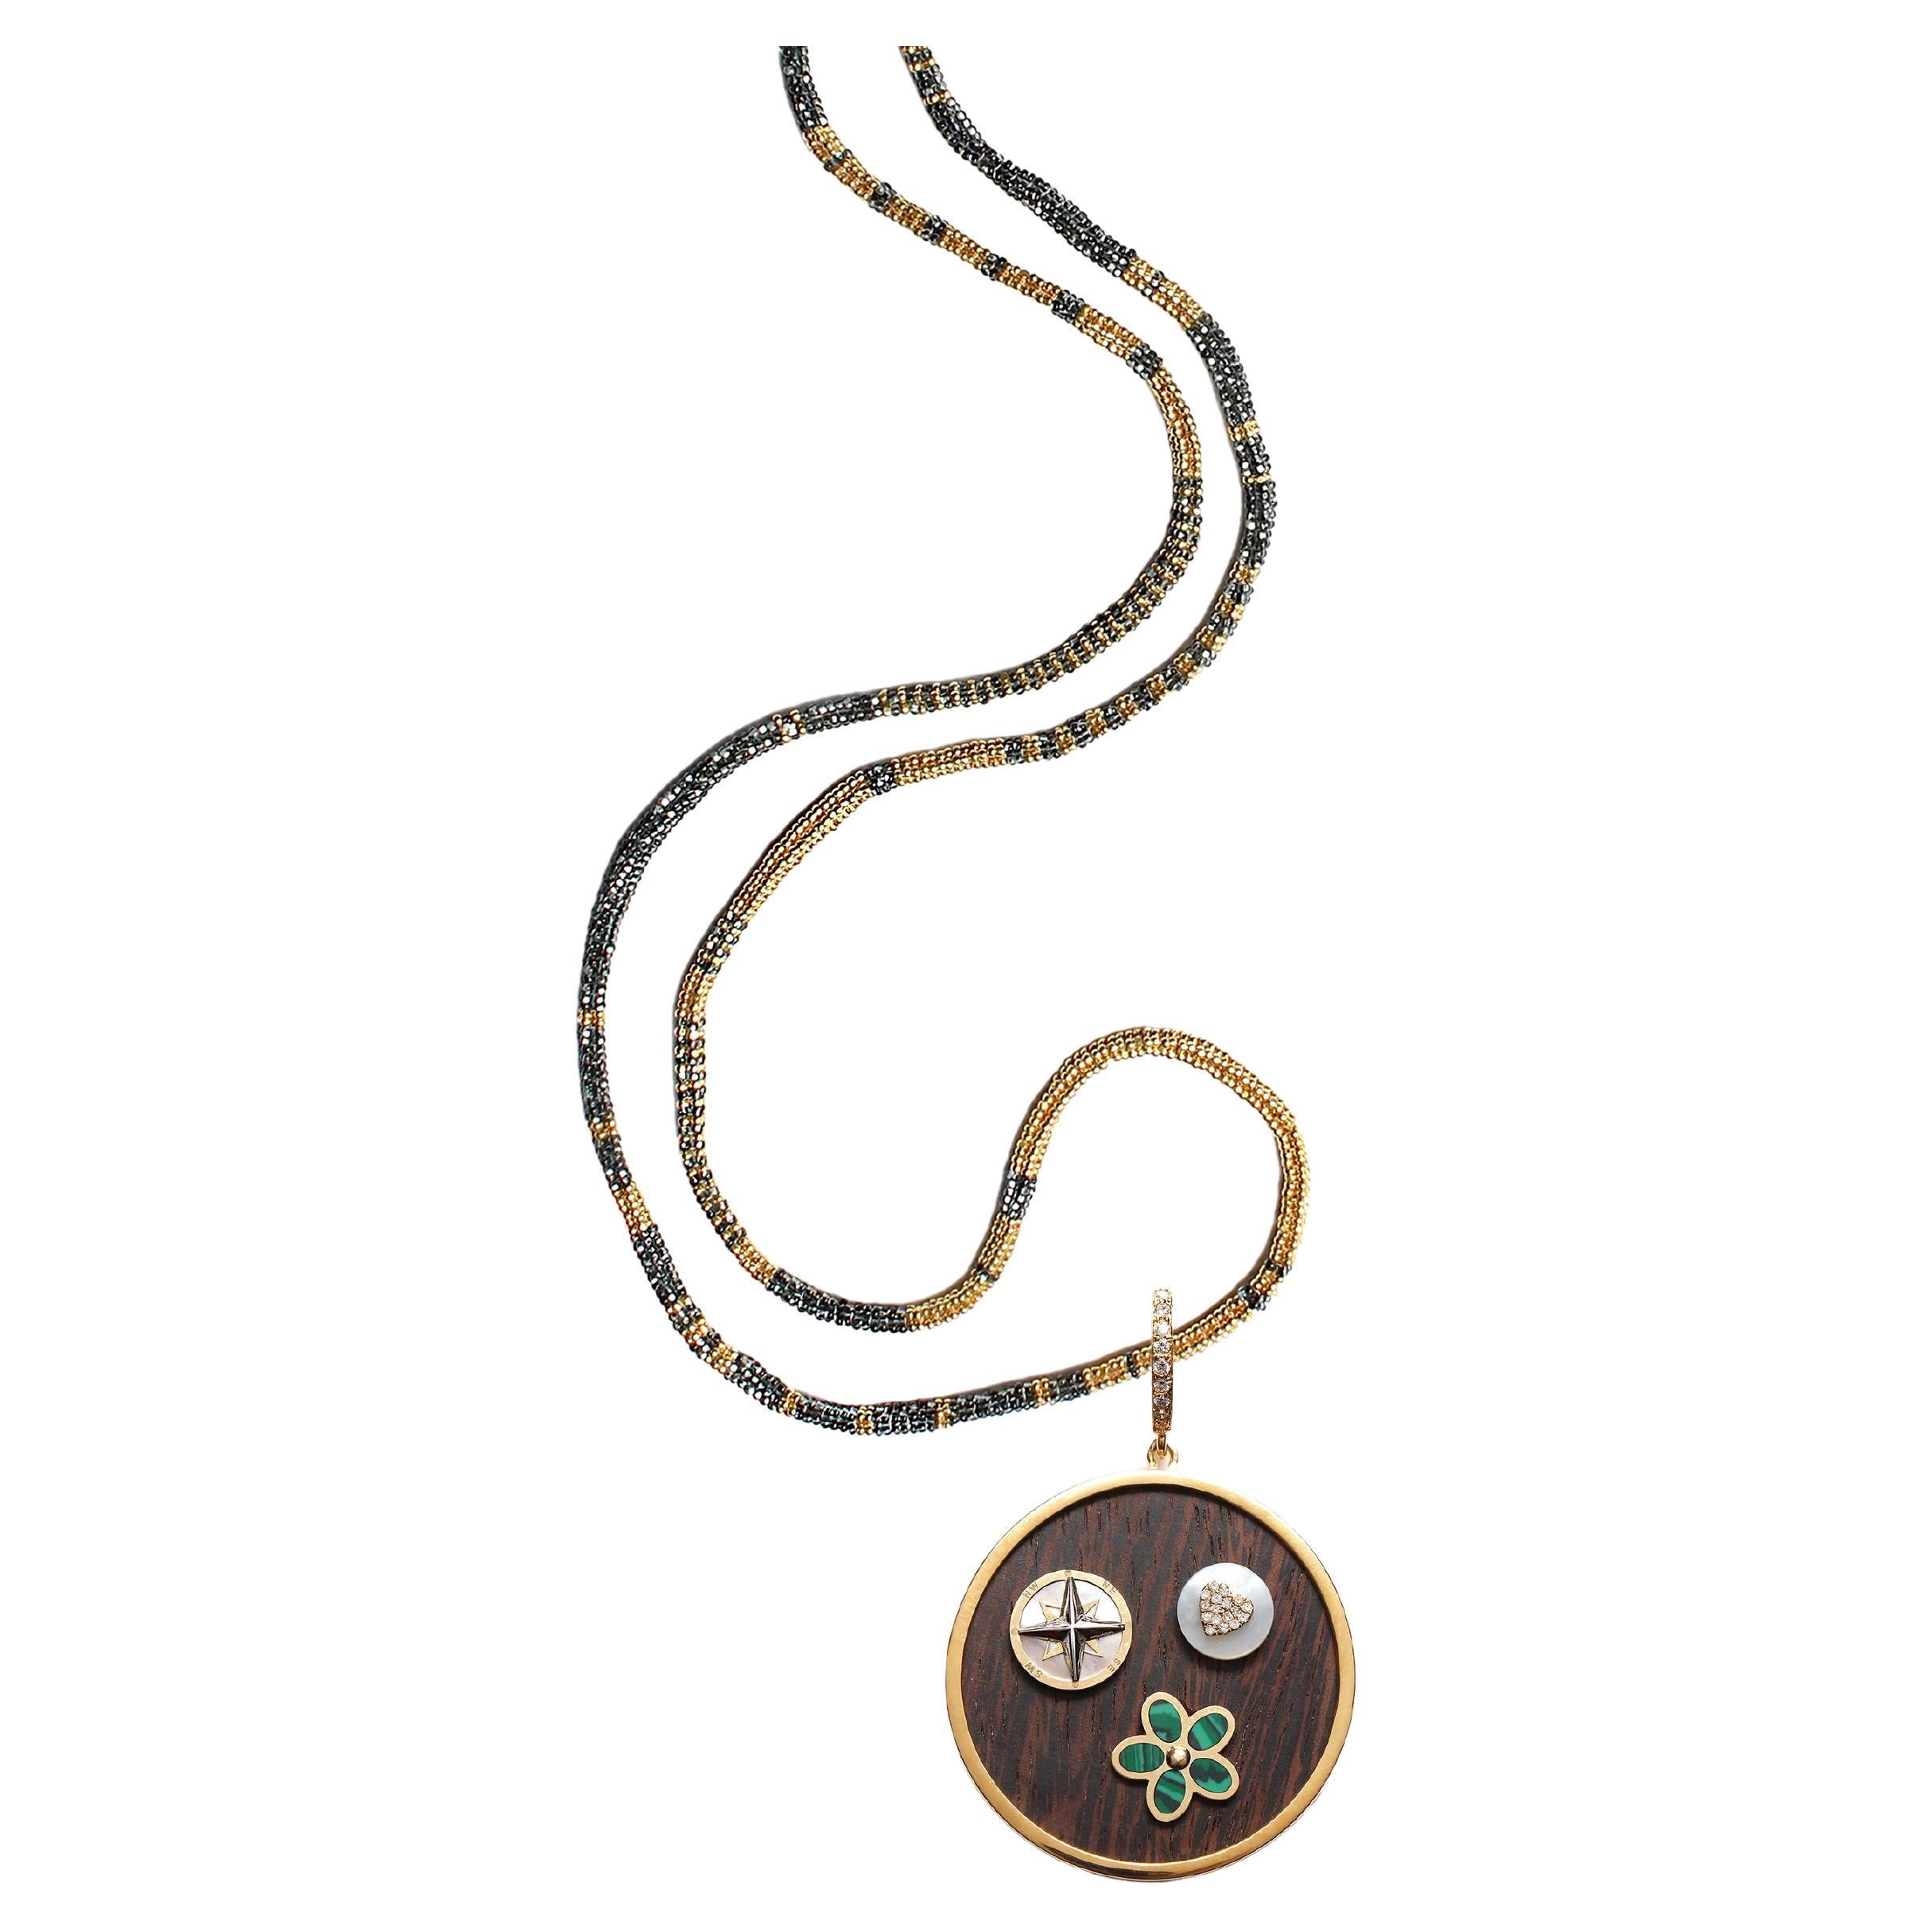 Clarissa Bronfman Alonso Grey Gold Necklace & 3 Charm Compass Ebony Gold Pendant For Sale